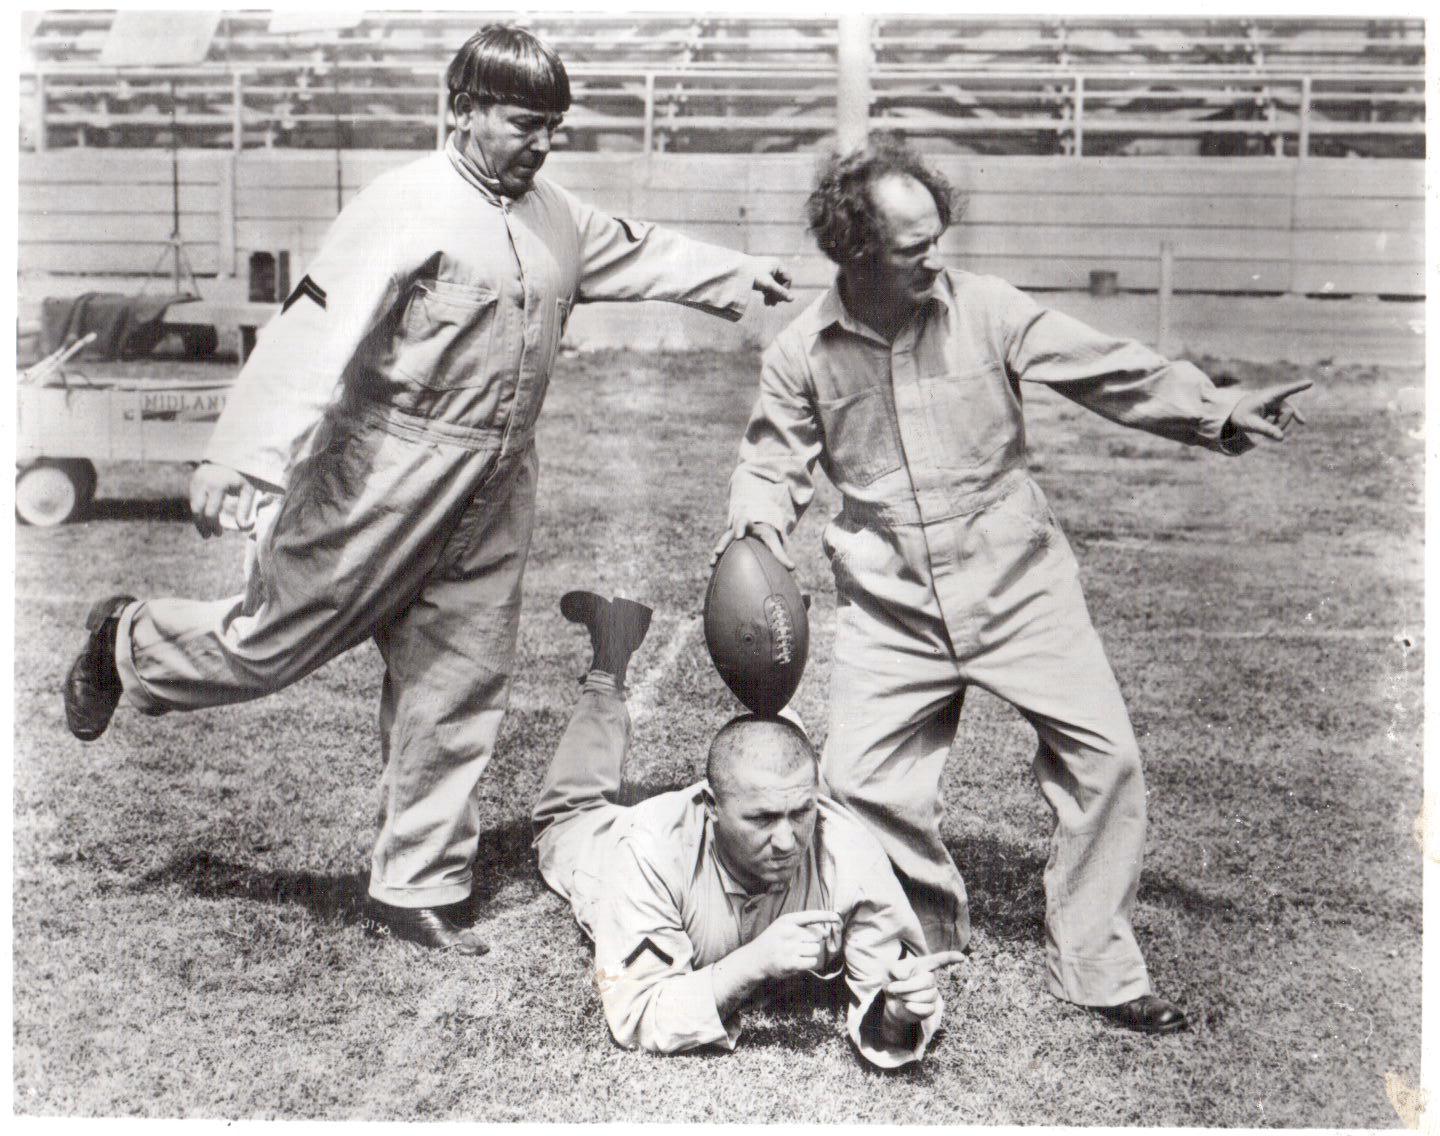 3 Stooges Football Moe Larry Curly Vintage 16X20 Matted BW TV Memorabilia Photo - $31.95